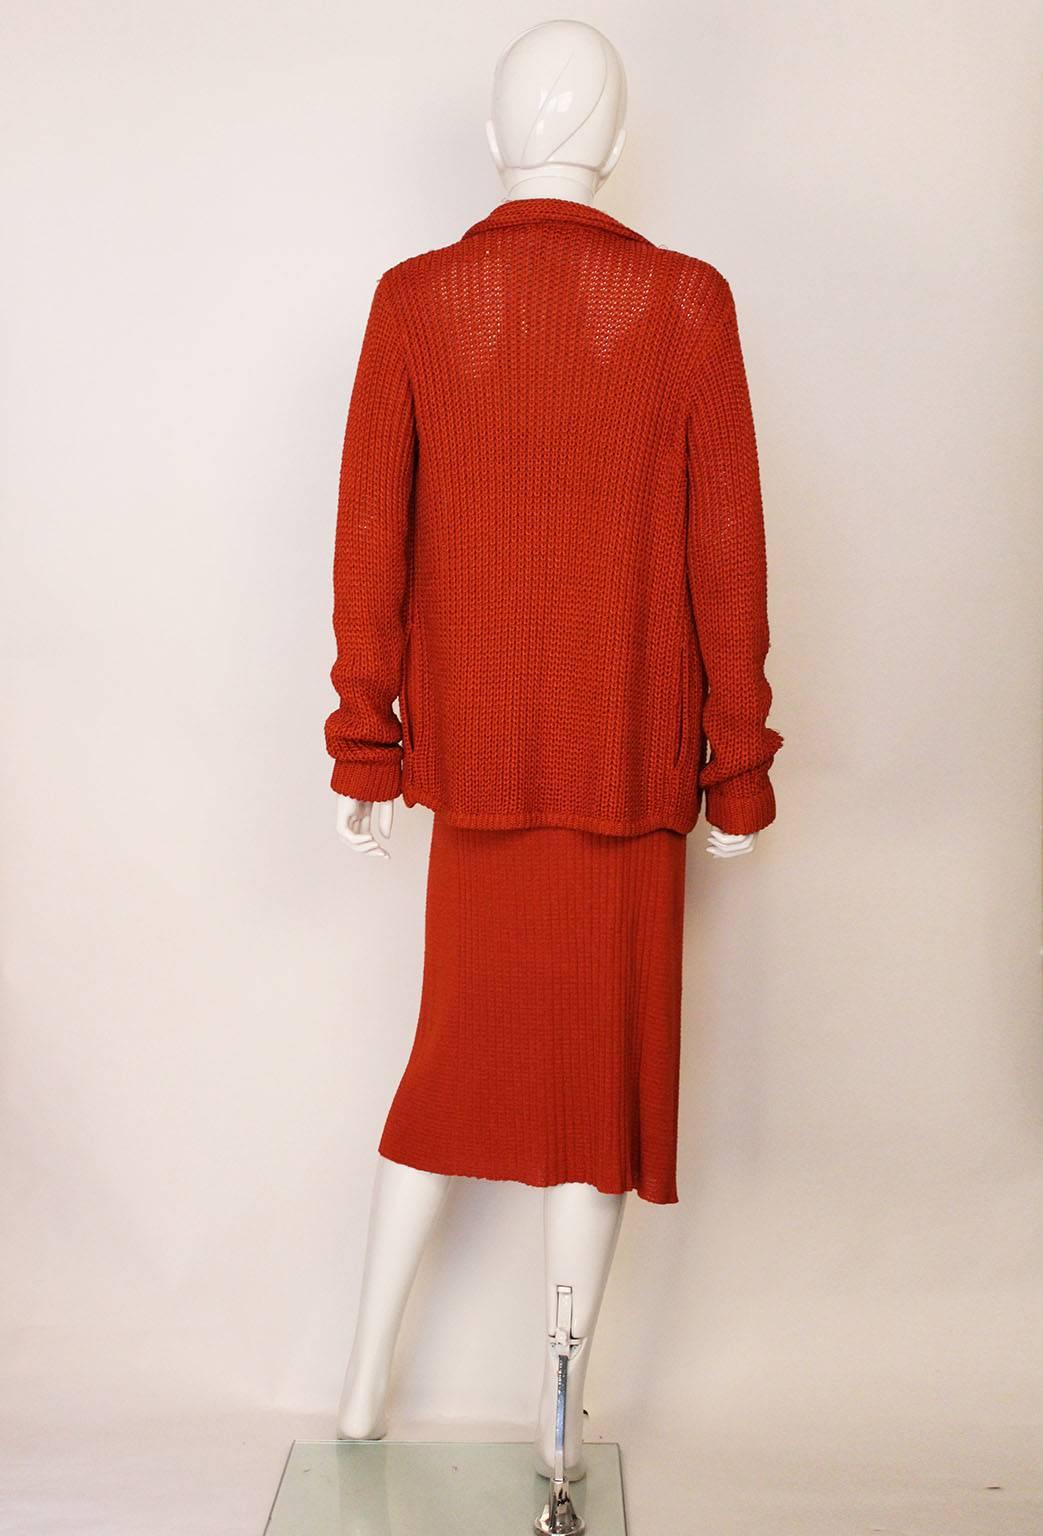 Women's 1990s Missoni Burnt Orange Knitted Three Piece Outfit.